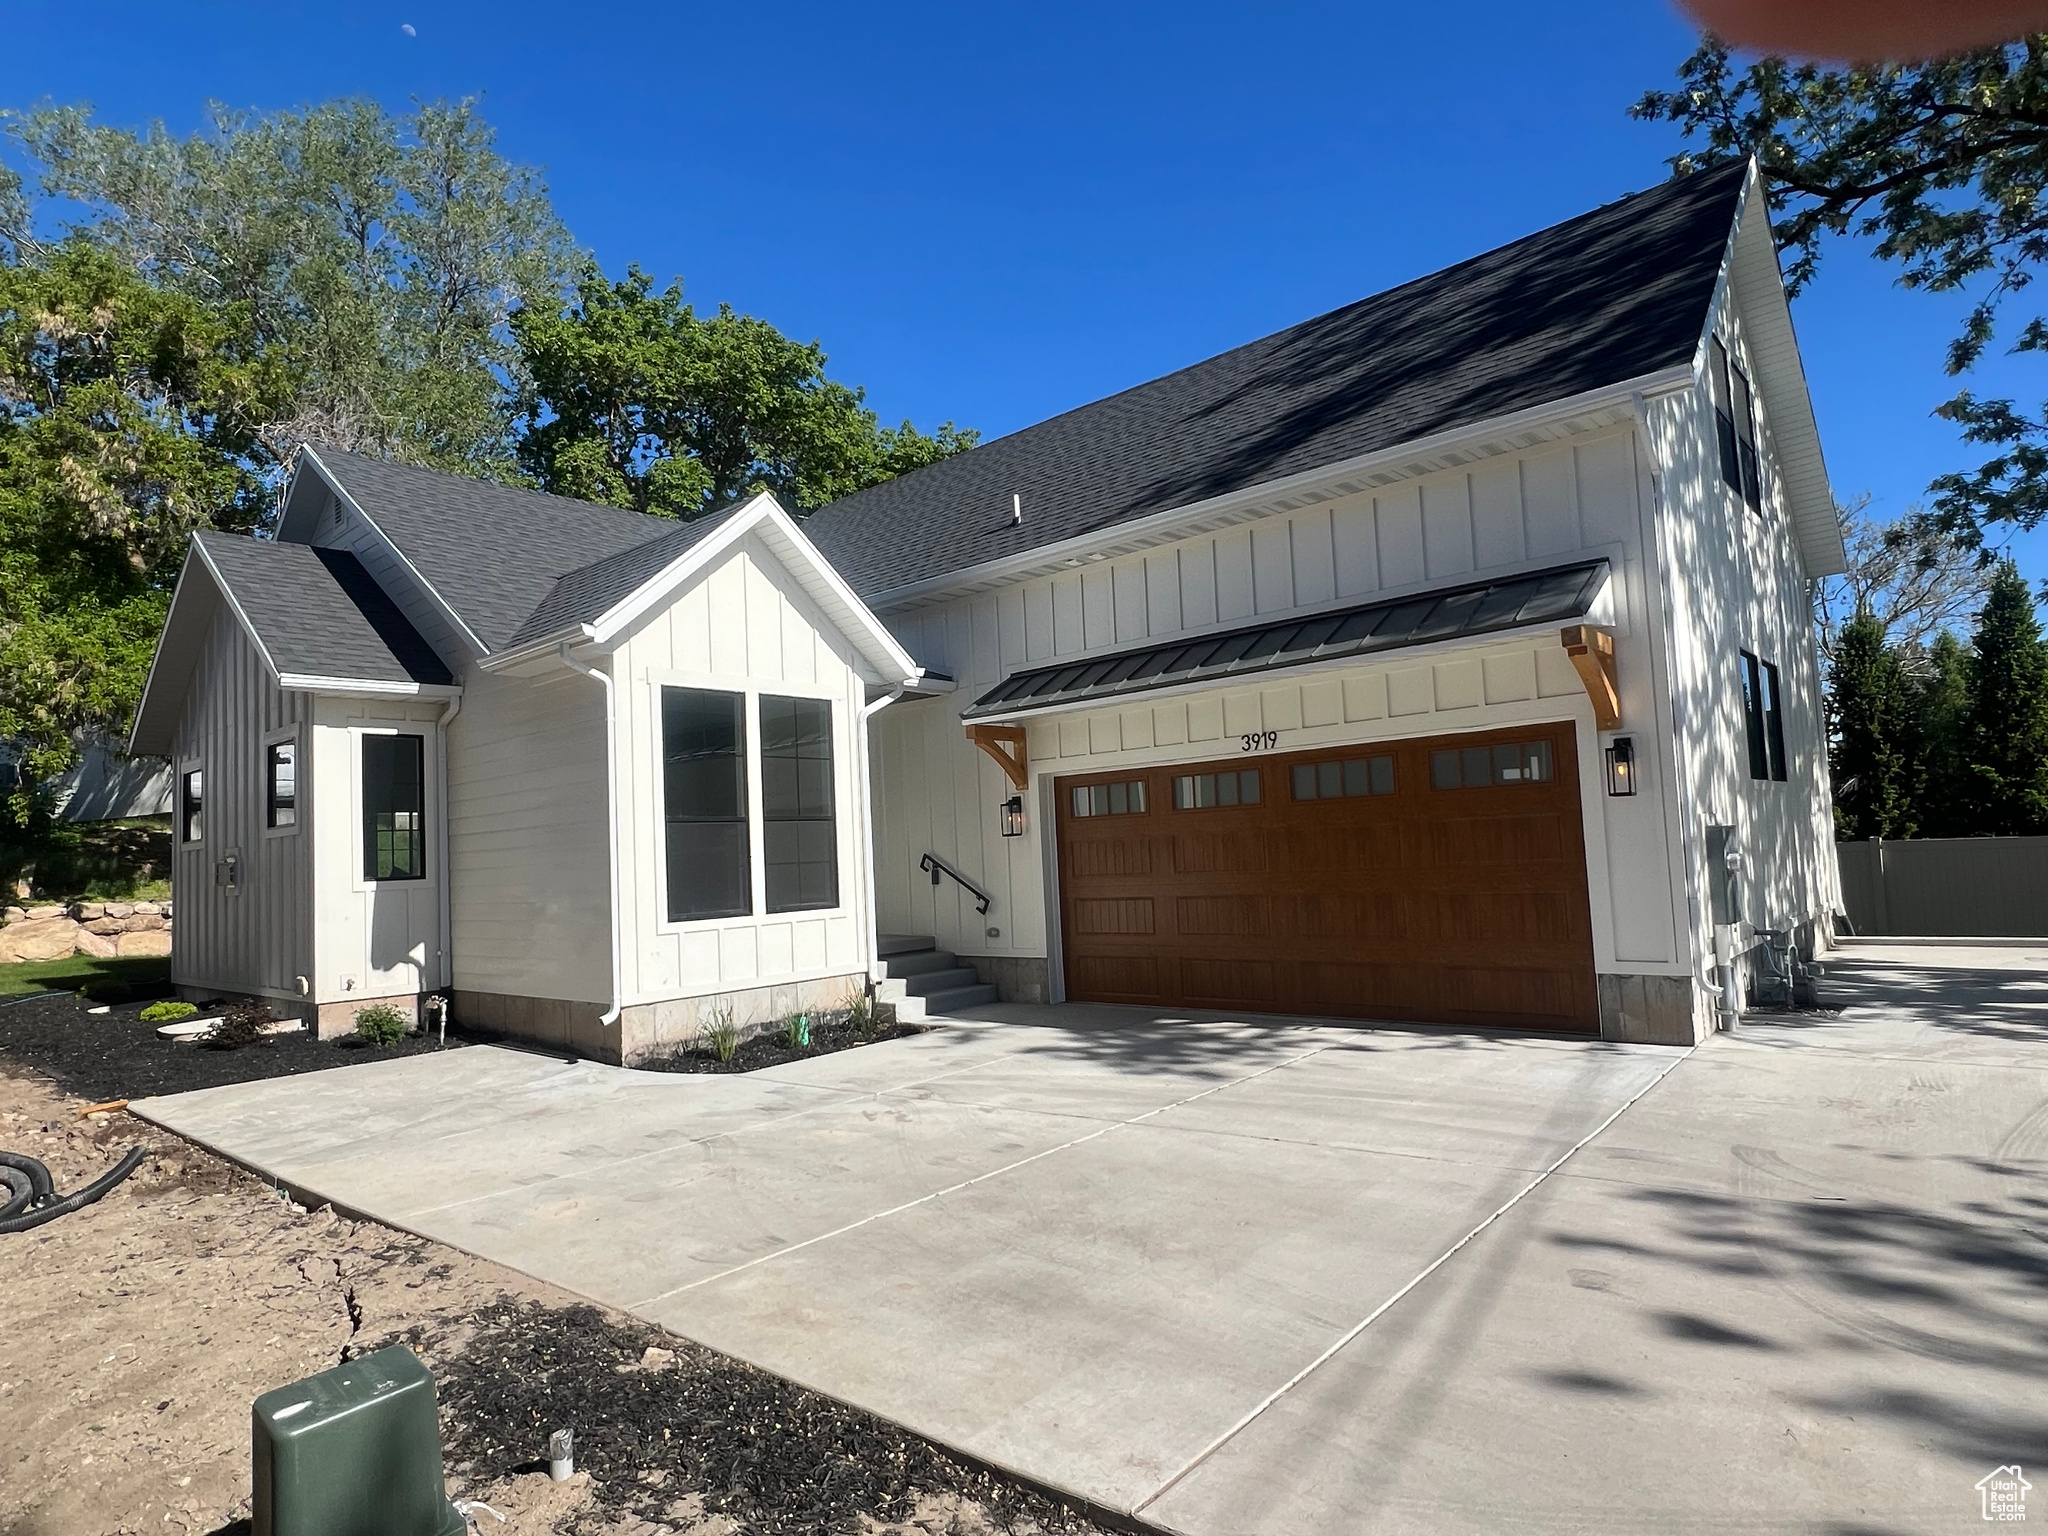 3919 S HOLLADAY CT. E, Holladay, Utah 84117, 4 Bedrooms Bedrooms, 16 Rooms Rooms,2 BathroomsBathrooms,Residential,For sale,HOLLADAY CT.,1975798